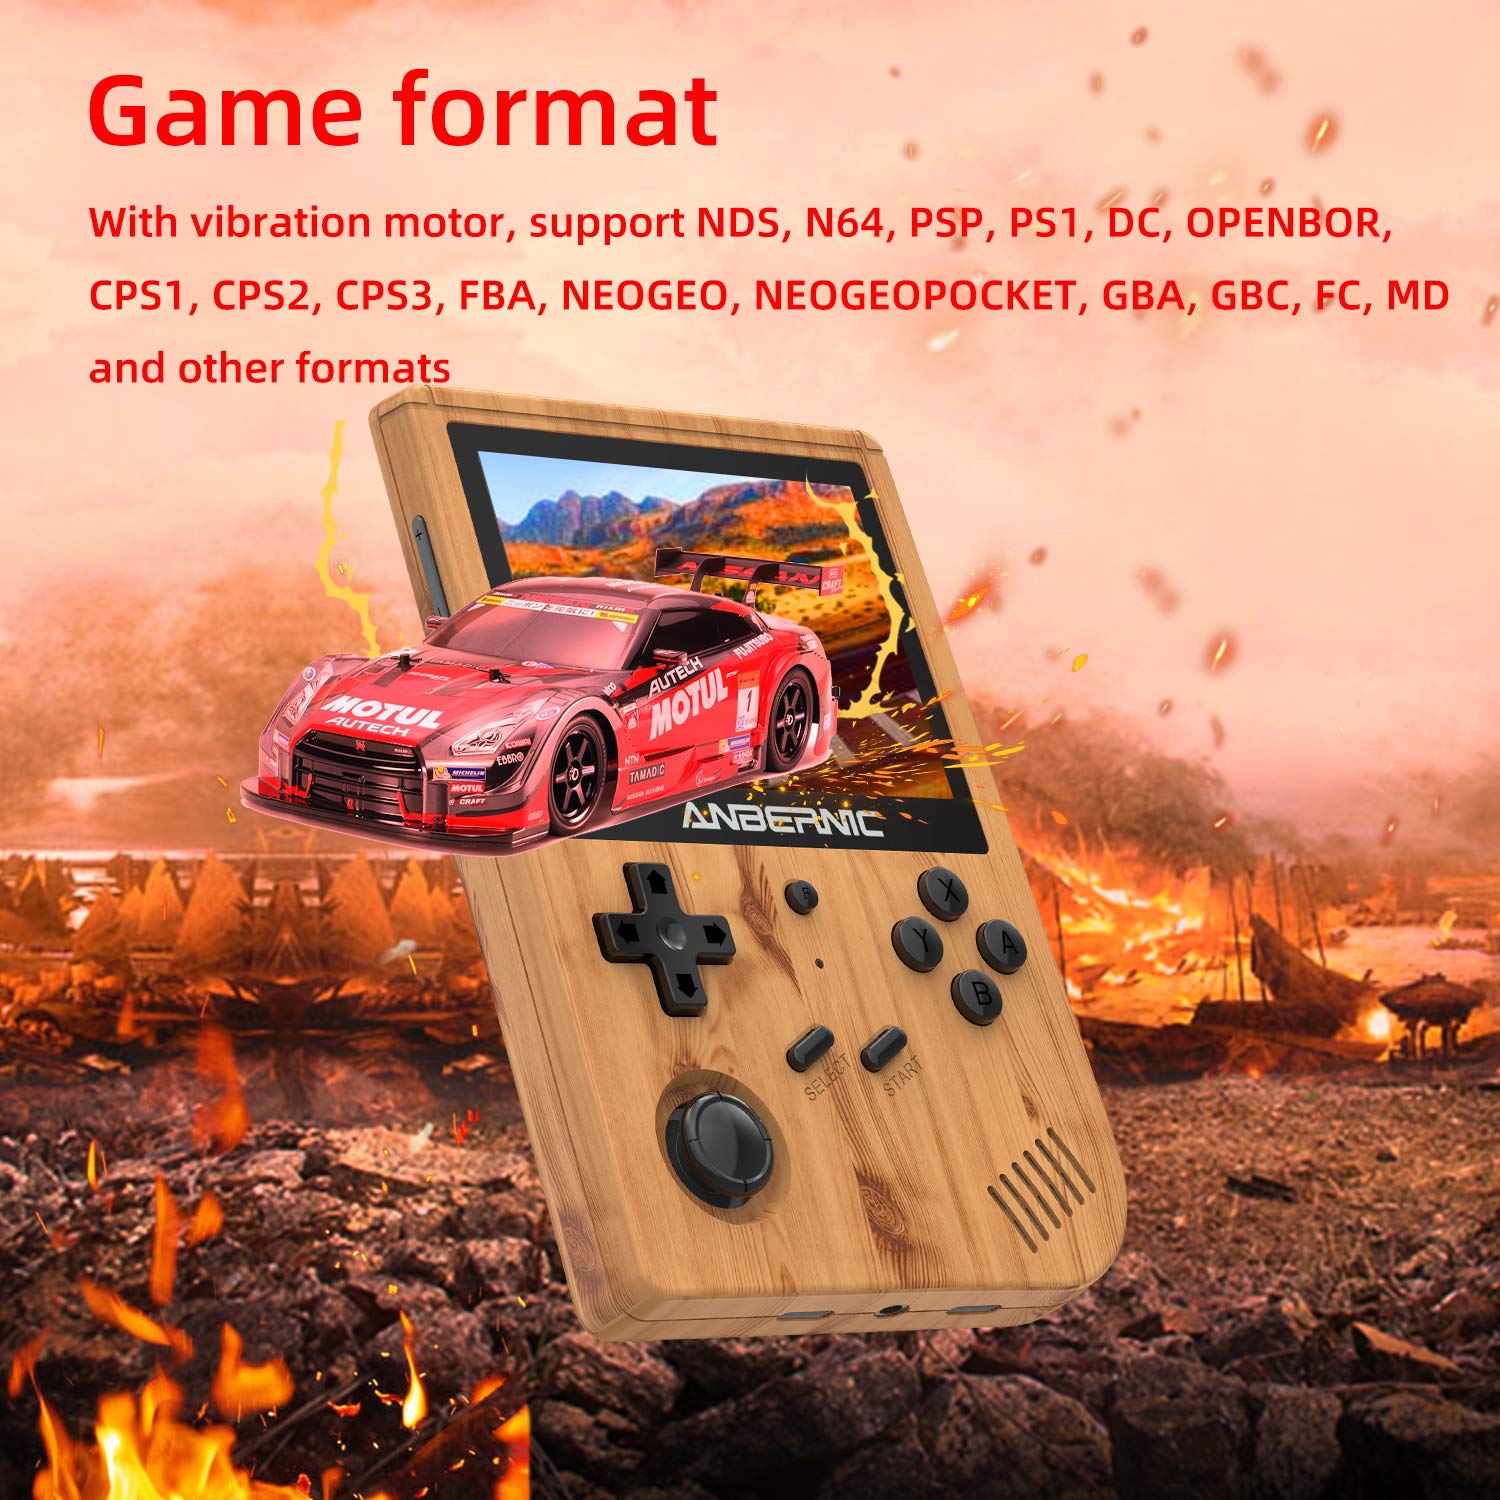 RG351V Handheld Game Console , Open Source System Built-in WiFi Online Sparring 64G TF Card 2500 Classic Games , 3.5inch IPS Screen Retro Game Console (Wood Grain)